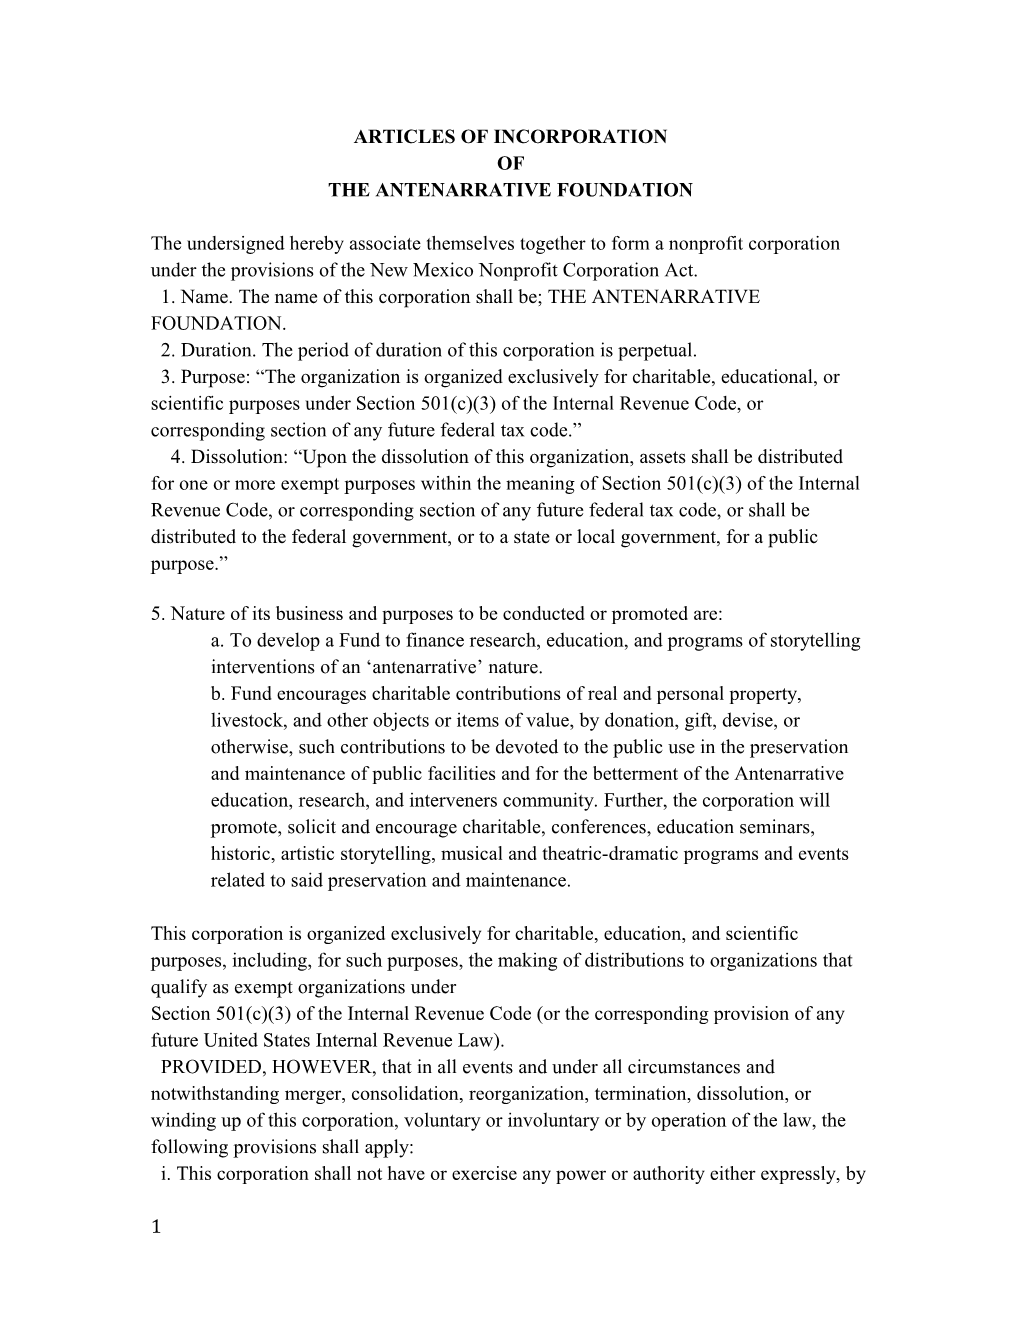 Articles of Incorporation s5